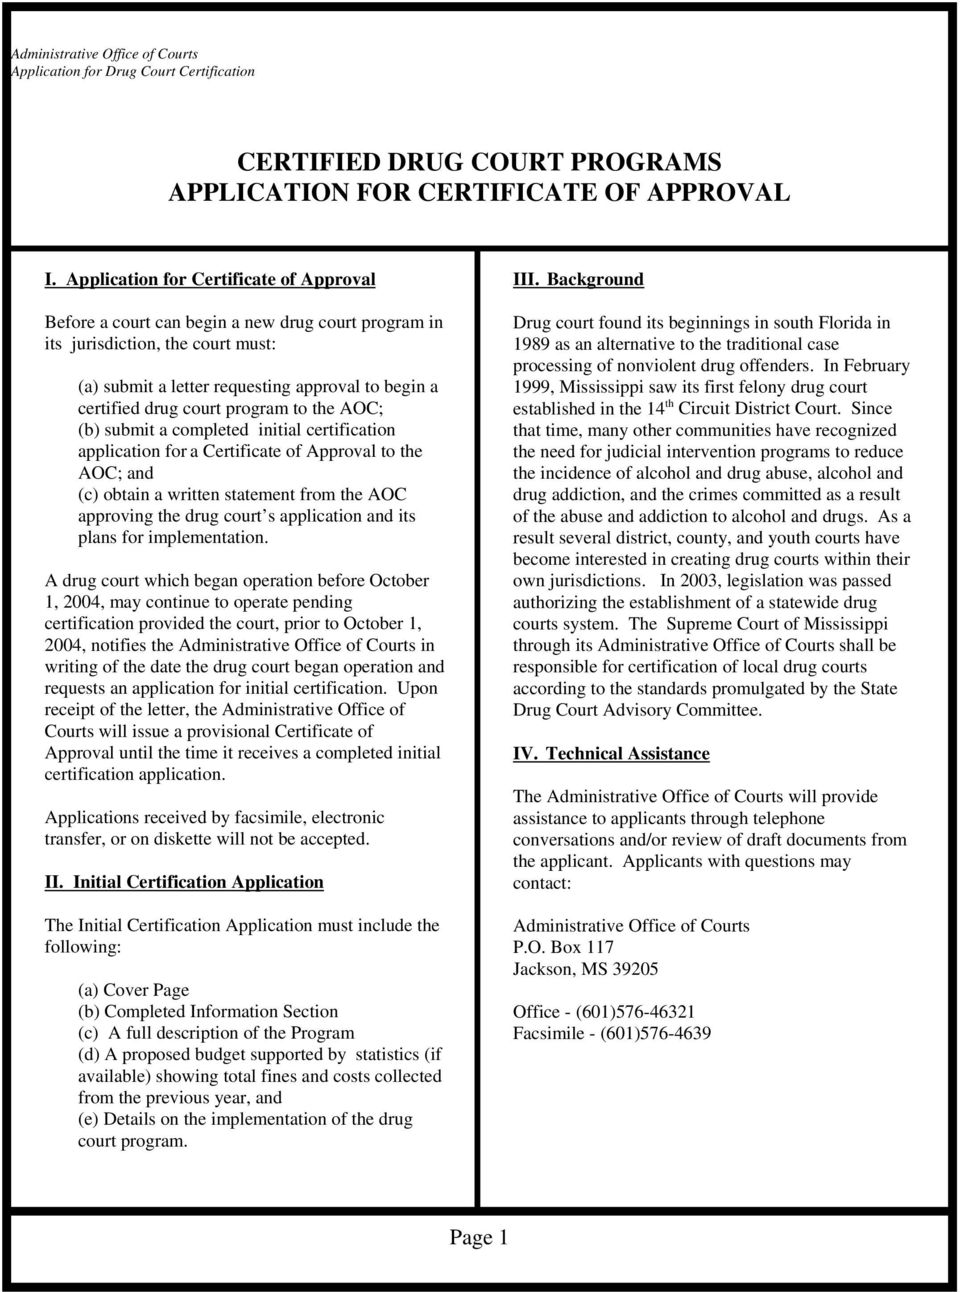 submit a completed initial certification application for a Certificate of Approval to the AOC; and (c) obtain a written statement from the AOC approving the drug court s application and its plans for